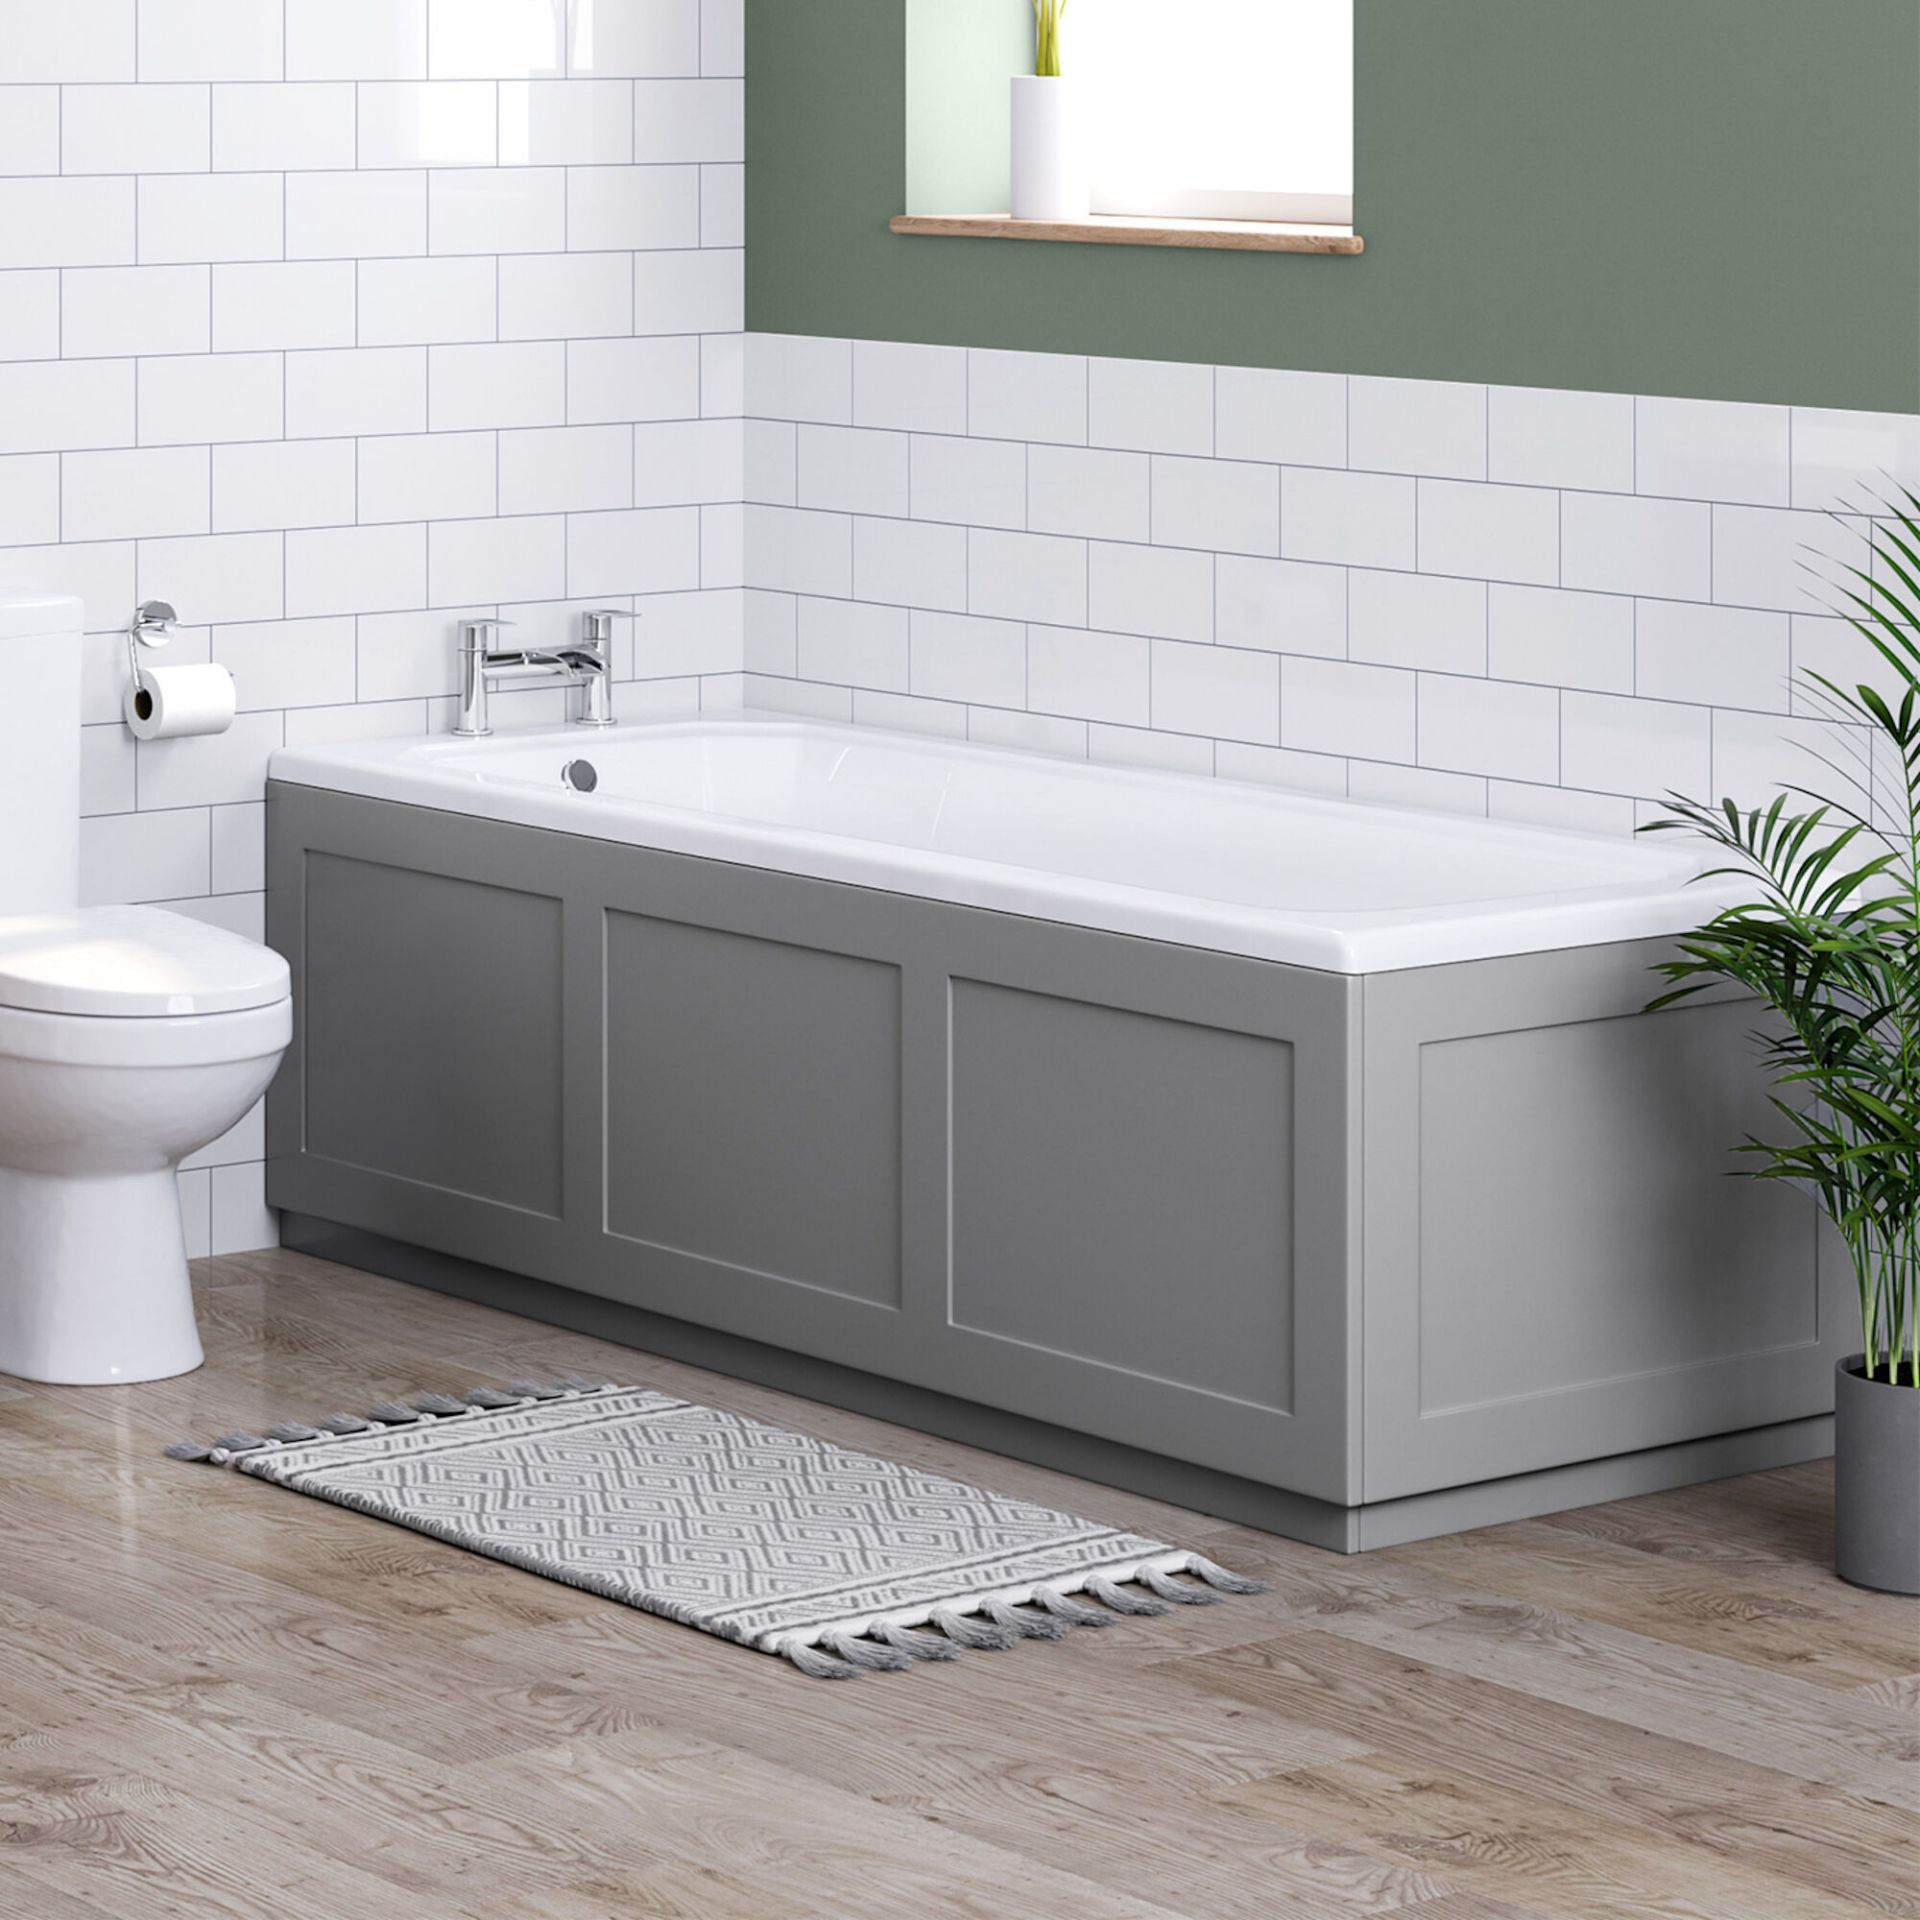 (DW66) 1800mm Melbourne Straight Bath Front Panel - Earl Grey. RRP £109.99. Traditional Earl G...